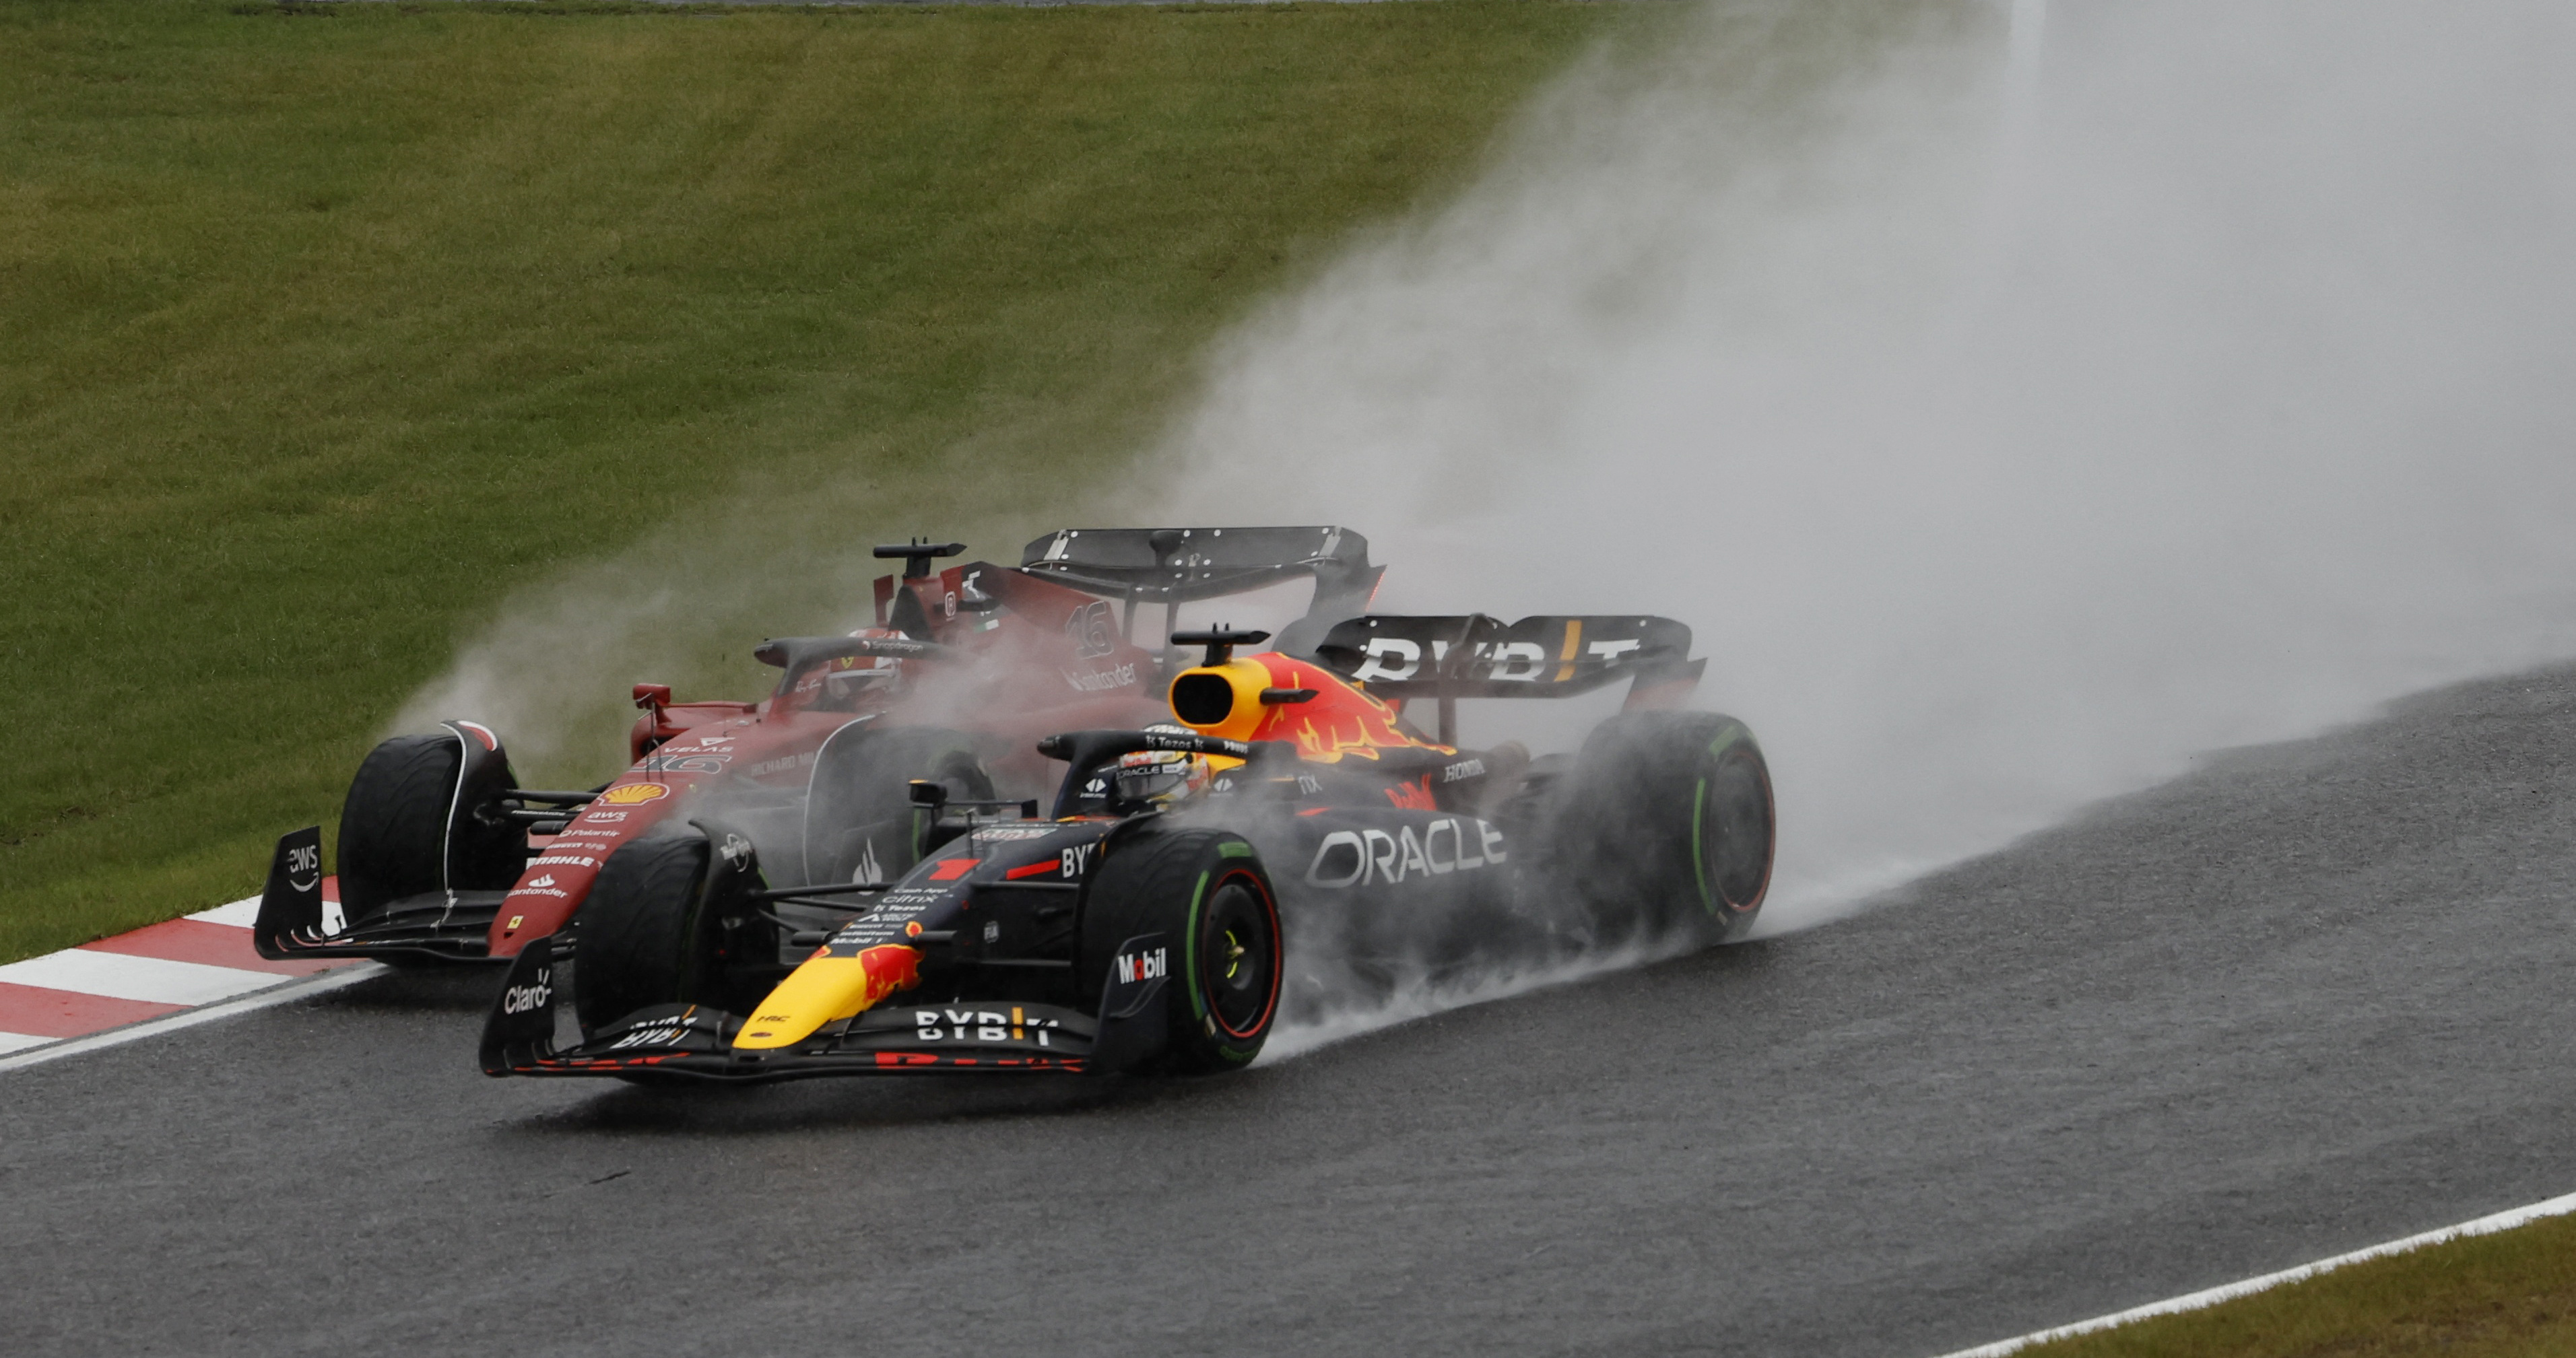 Max Verstappen fended off Charles Leclerc at the start of the race and held first position (REUTERS / Issei Kato)